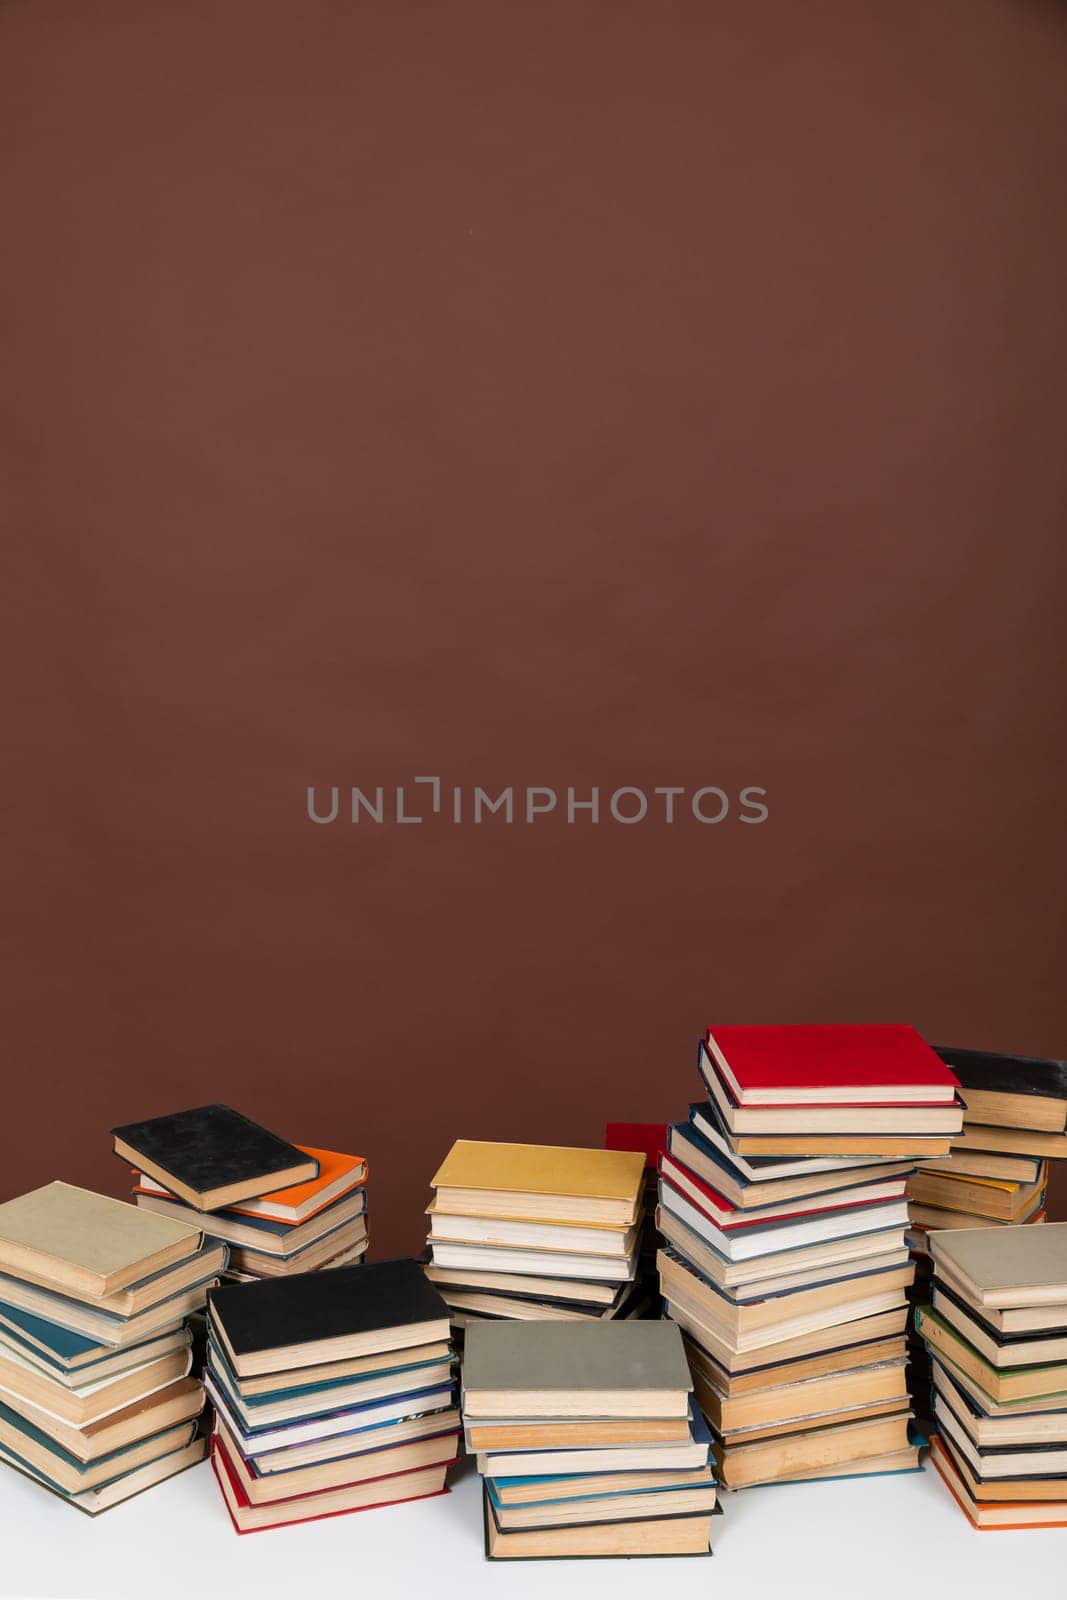 an education science learning library stack of books on brown background